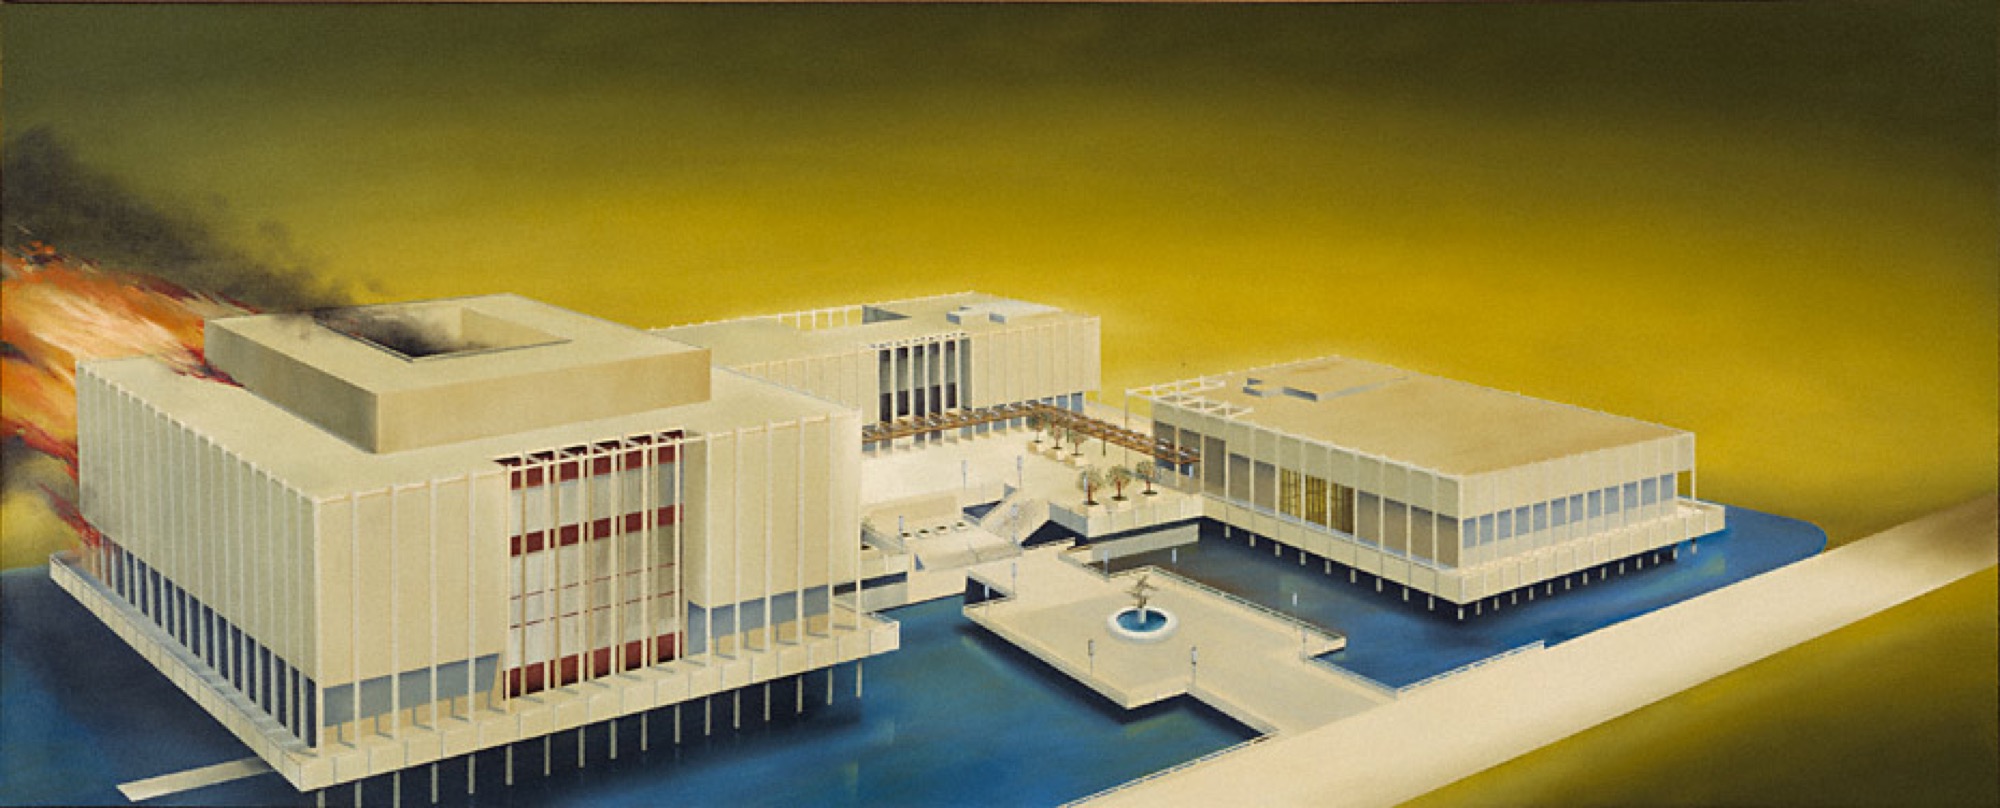 The Los Angeles County Museum on Fire, 1965–68, Ed Ruscha. Oil on canvas. 53 1/2 x 133 1/2 in. Hirshhorn Museum and Sculpture Garden, Smithsonian Institution, Washington, D.C., Gift of Joseph H. Hirshhorn, 1972. © Ed Ruscha. Photography by Lee Stalsworth